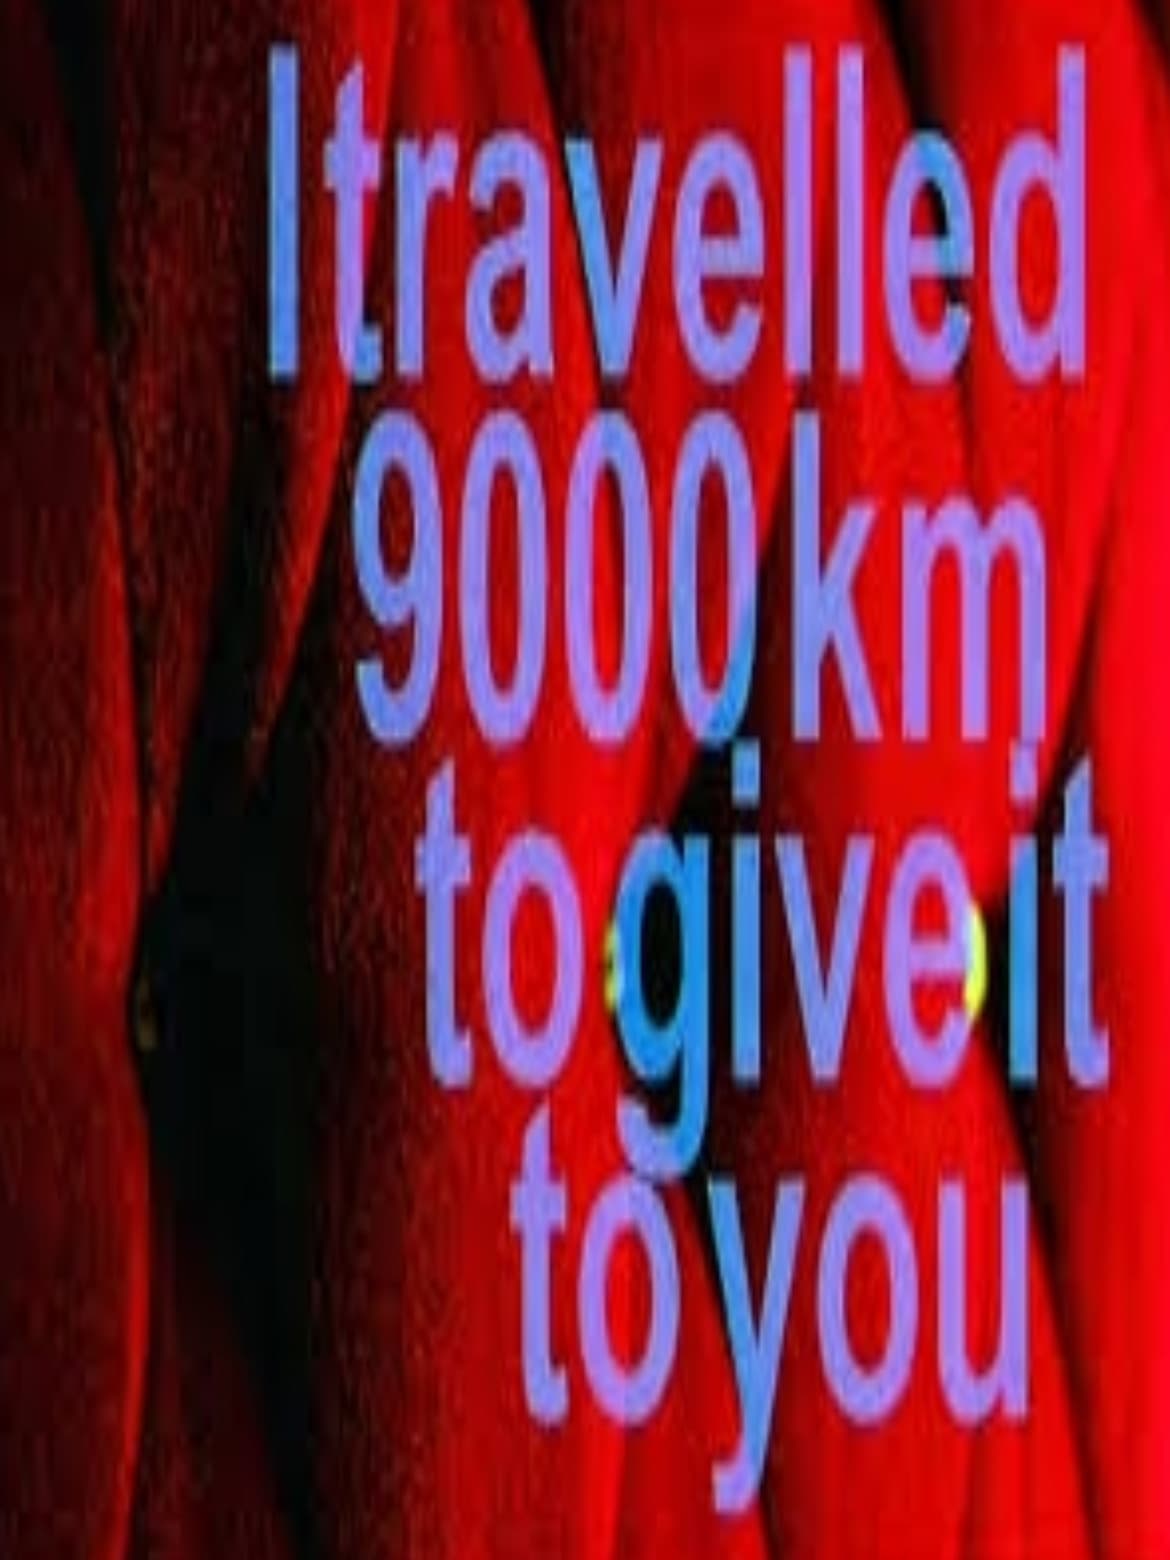 I Travelled 9000 km to Give It to You